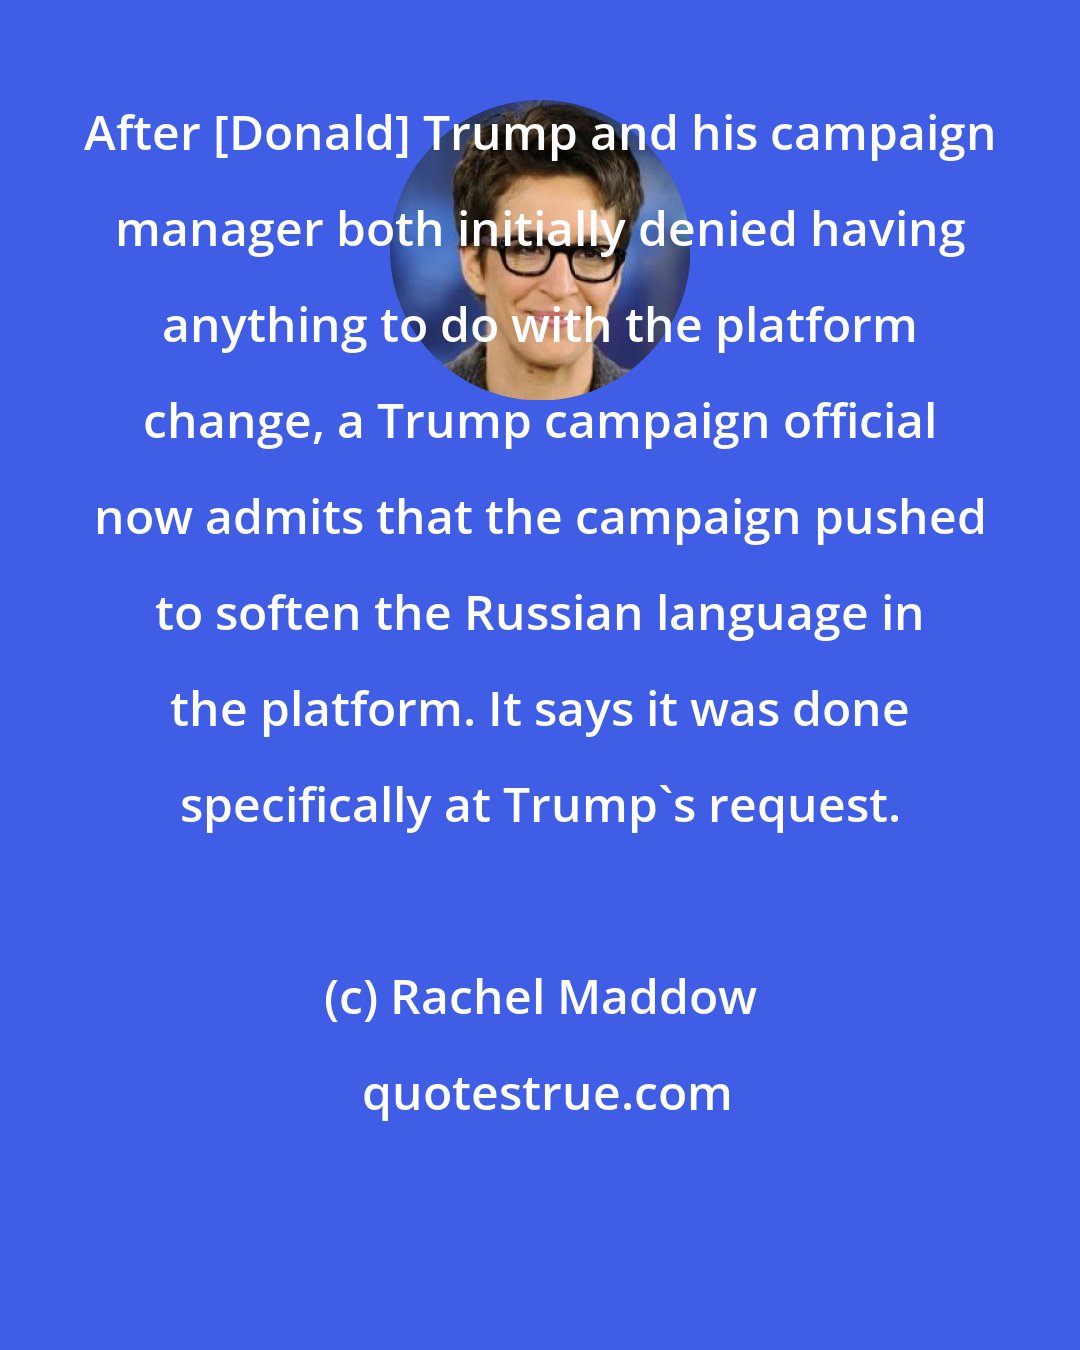 Rachel Maddow: After [Donald] Trump and his campaign manager both initially denied having anything to do with the platform change, a Trump campaign official now admits that the campaign pushed to soften the Russian language in the platform. It says it was done specifically at Trump`s request.